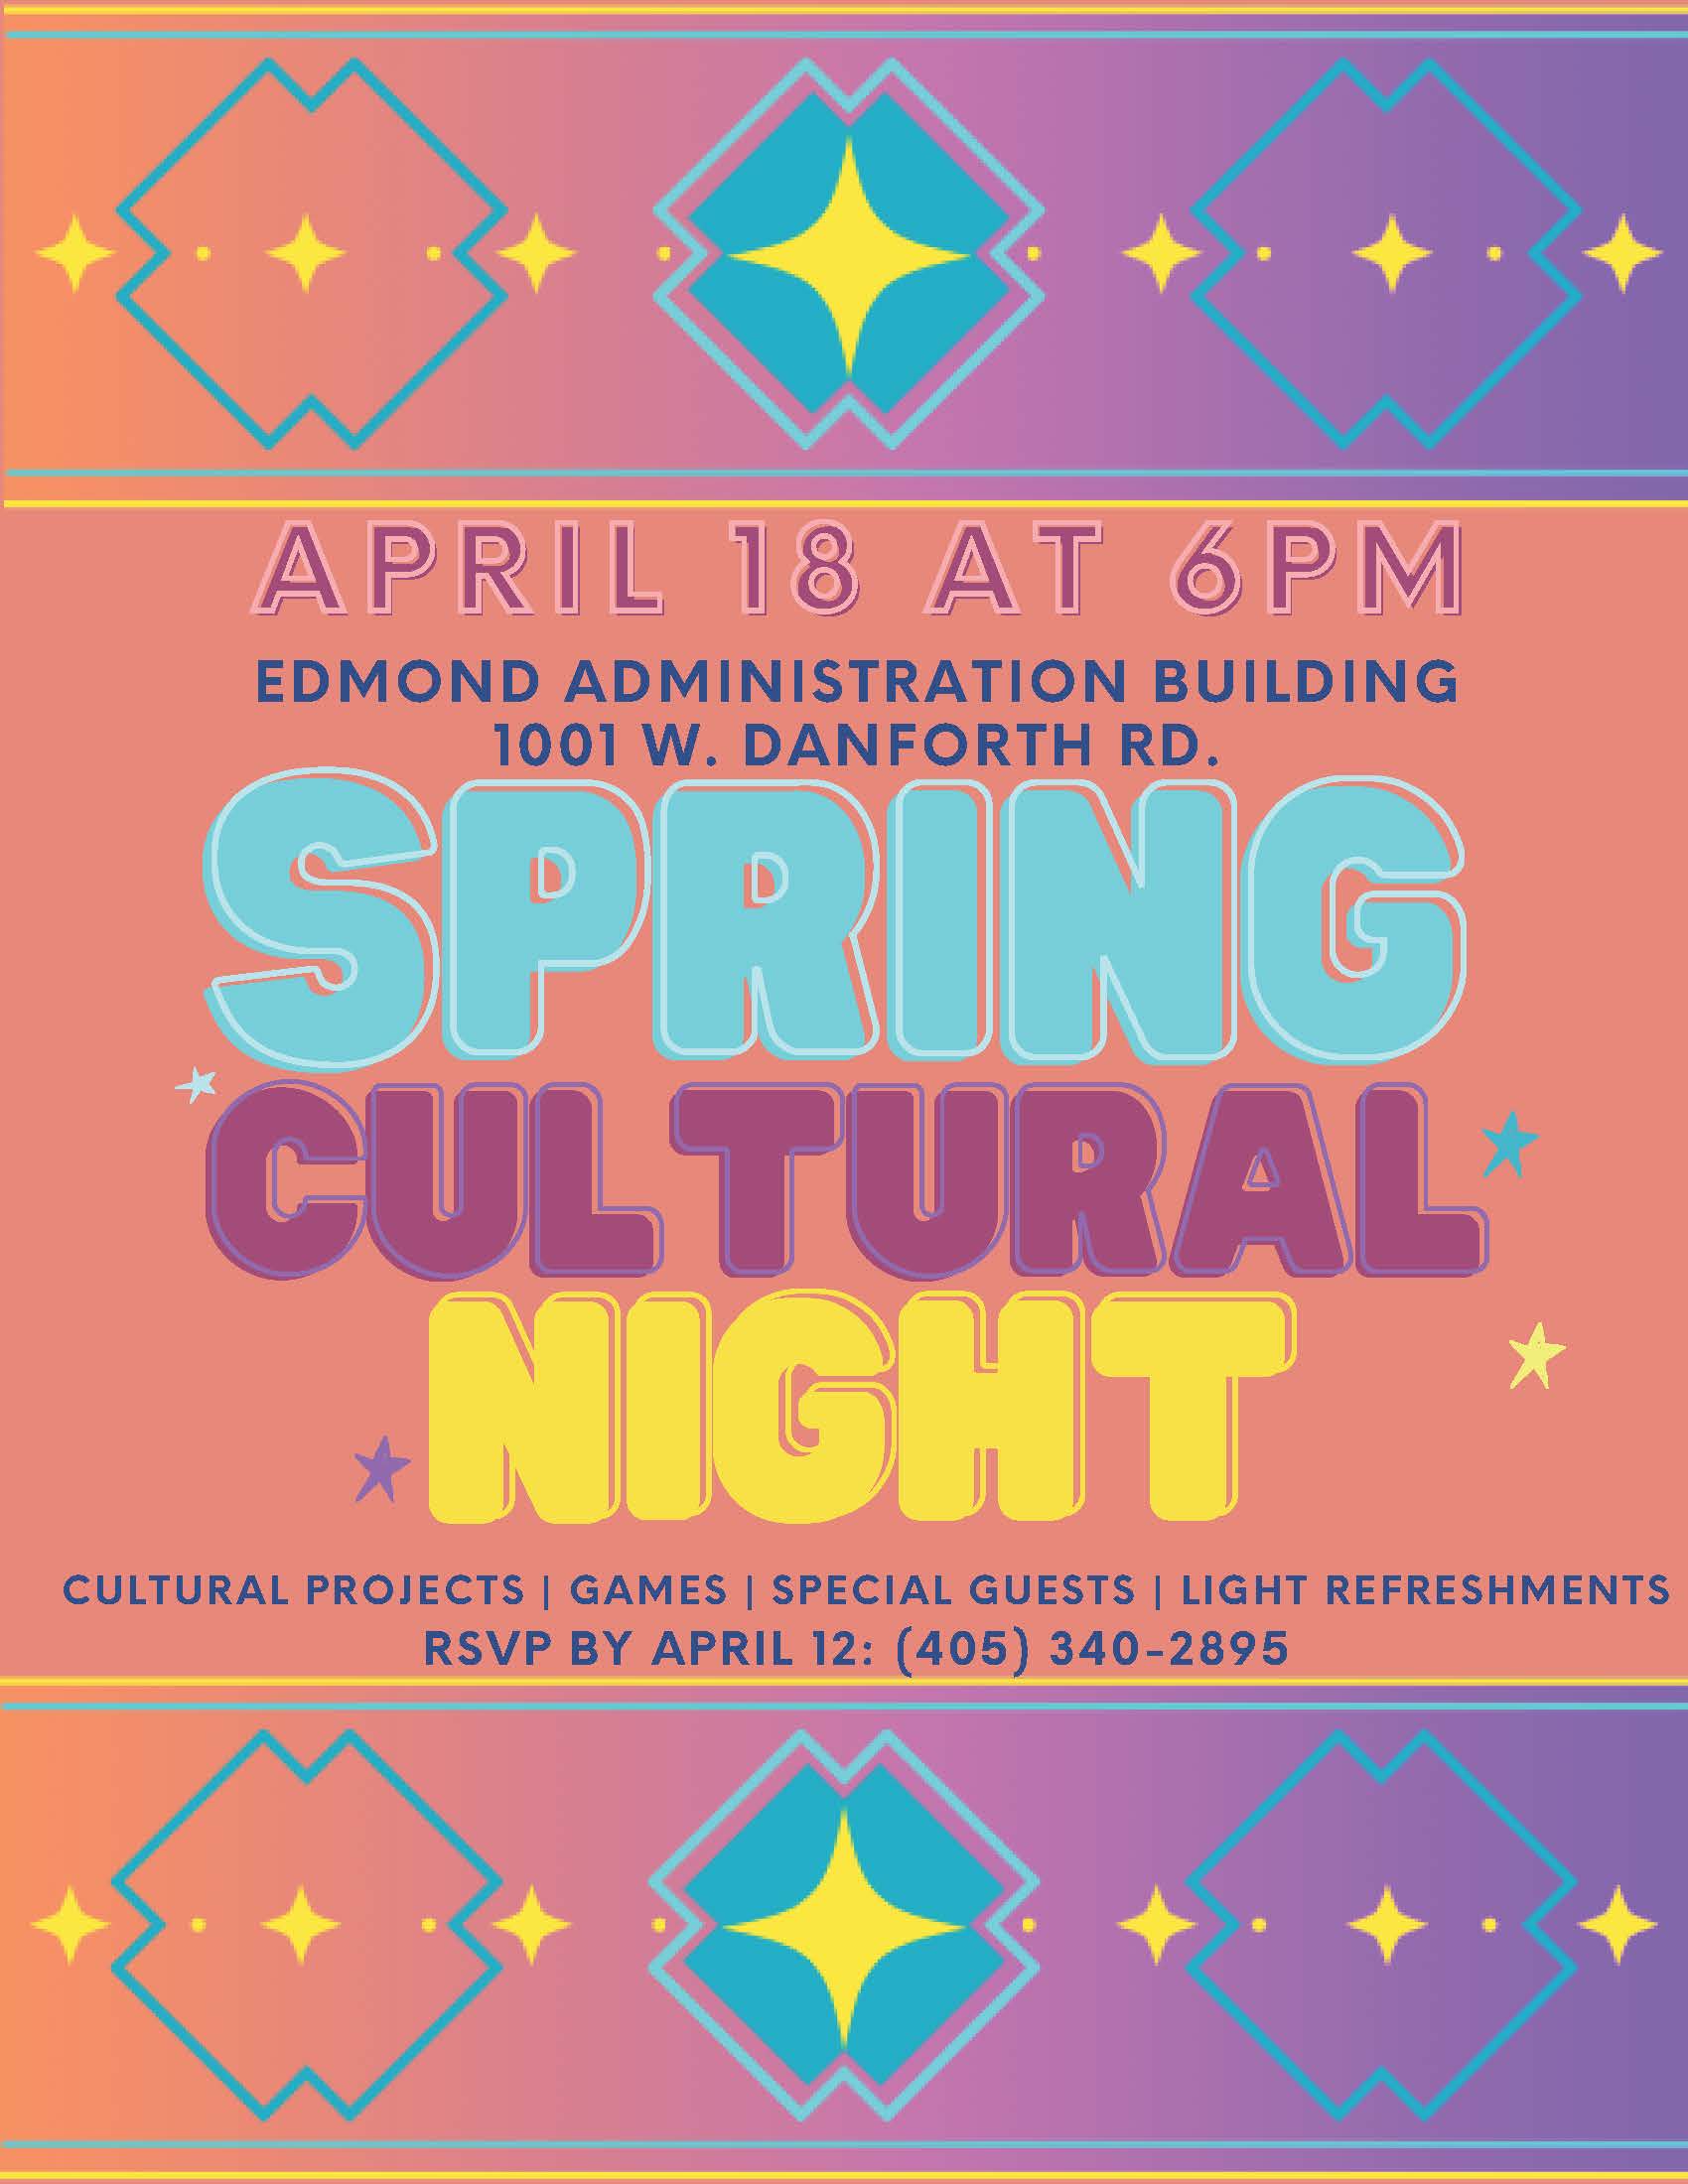 APRIL 18 AT 6PM EDMOND ADMINISTRATION BUILDING 1001 W. DANFORTH RD. SPRING CULTURAL' NIGHT CULTURAL PROJECTS | GAMES | SPECIAL GUESTS | LIGHT REFRESHMENTS RSVP BY APRIL 12: (405)